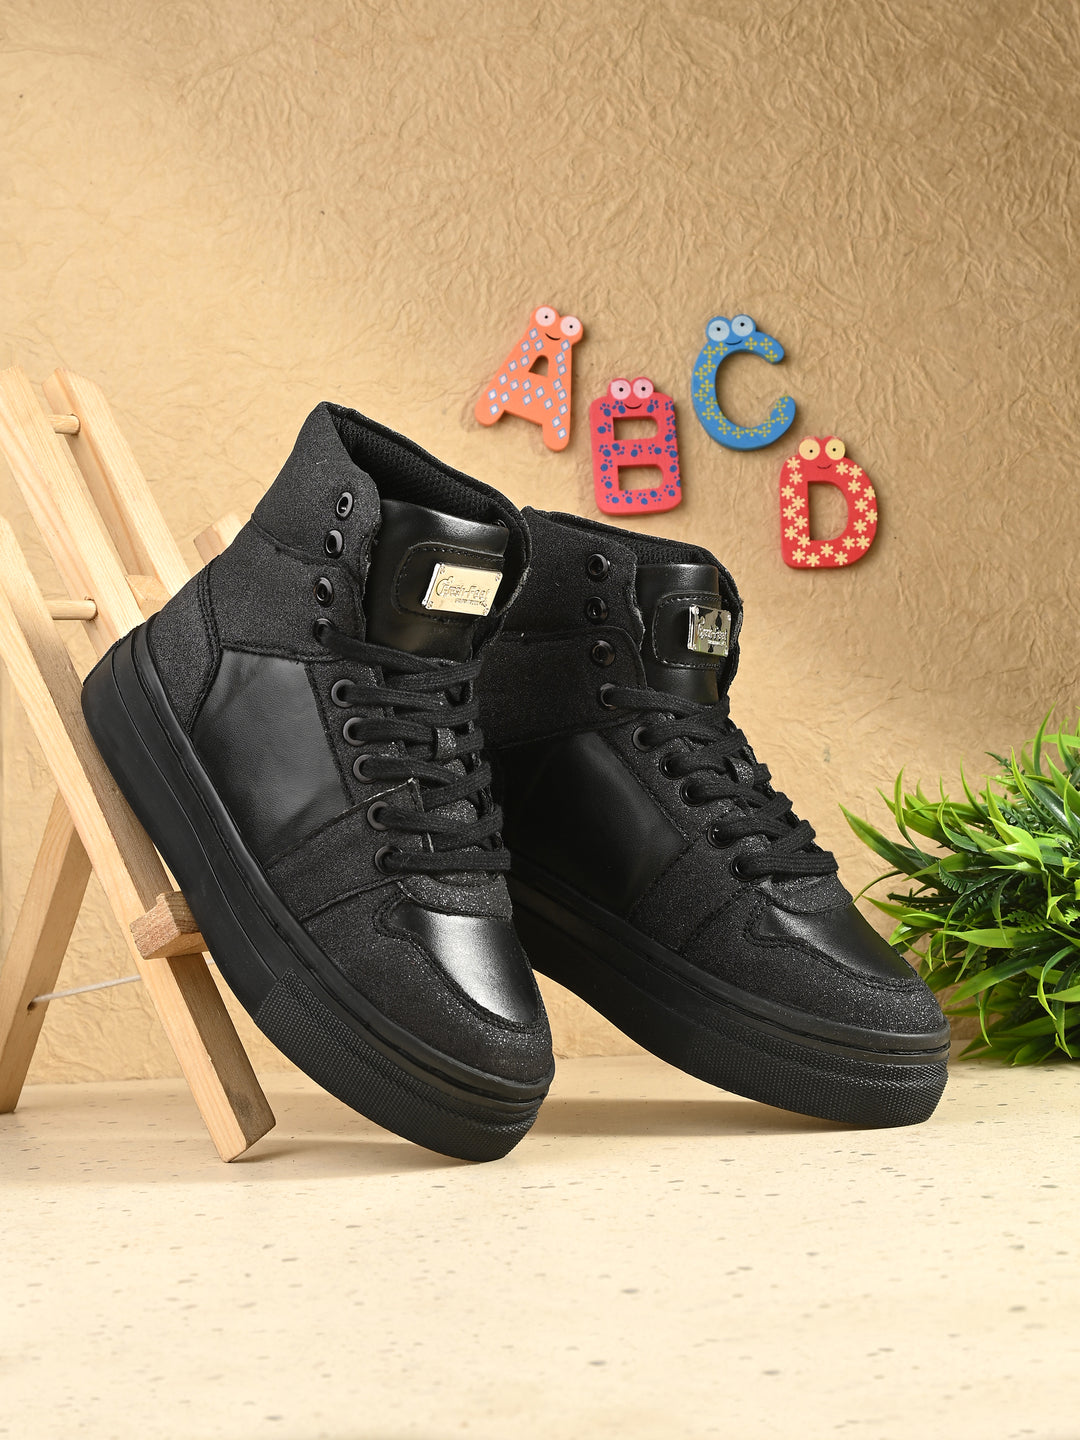 Nick Black Dual Size technology Shoes for Kids